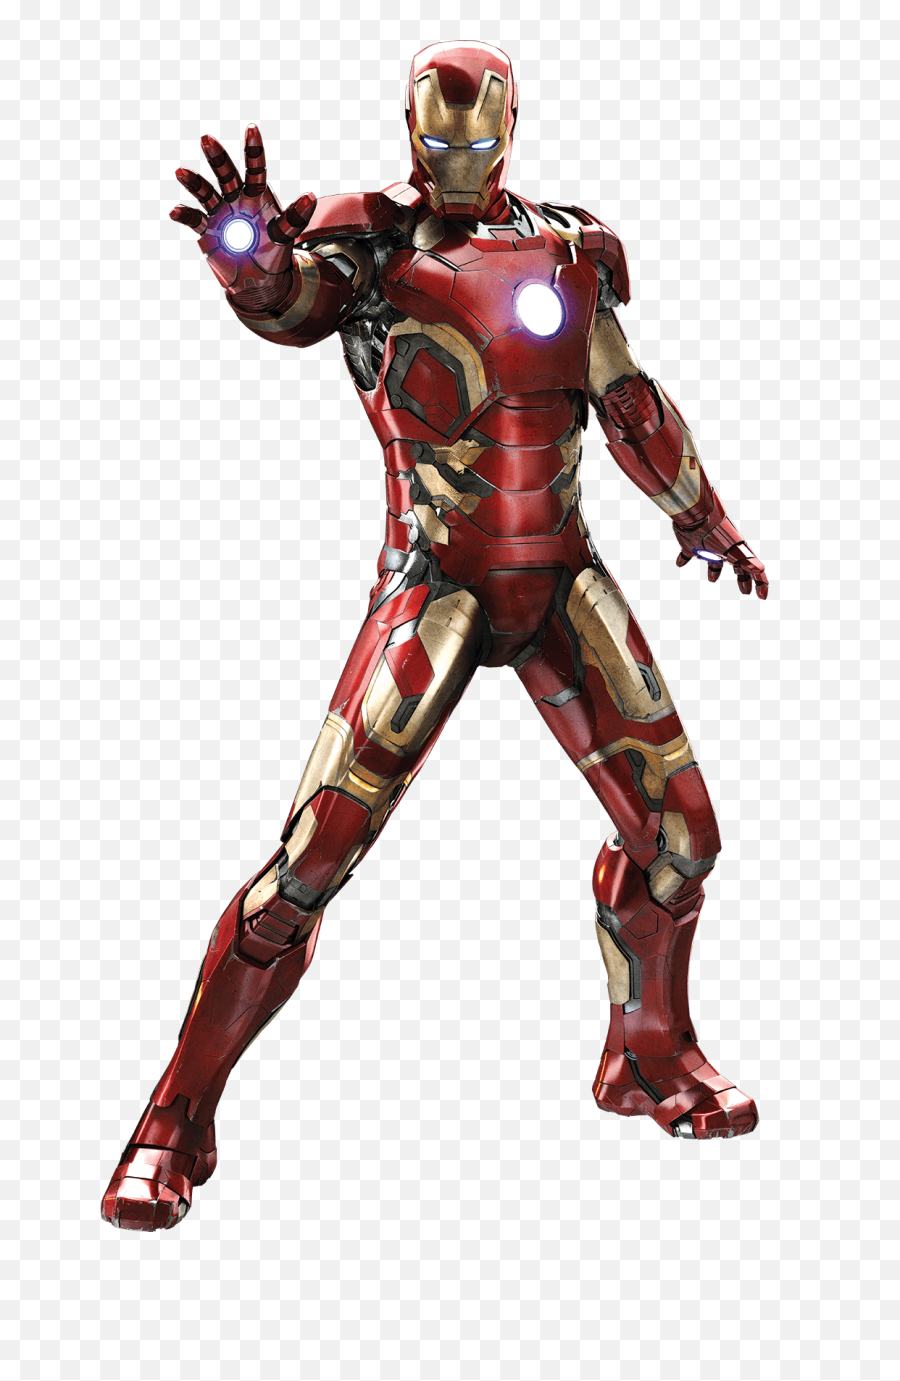 The Avengers Png - About Avengers S Elon Musk Iron Man Age Of Ultron,Avengers Transparent